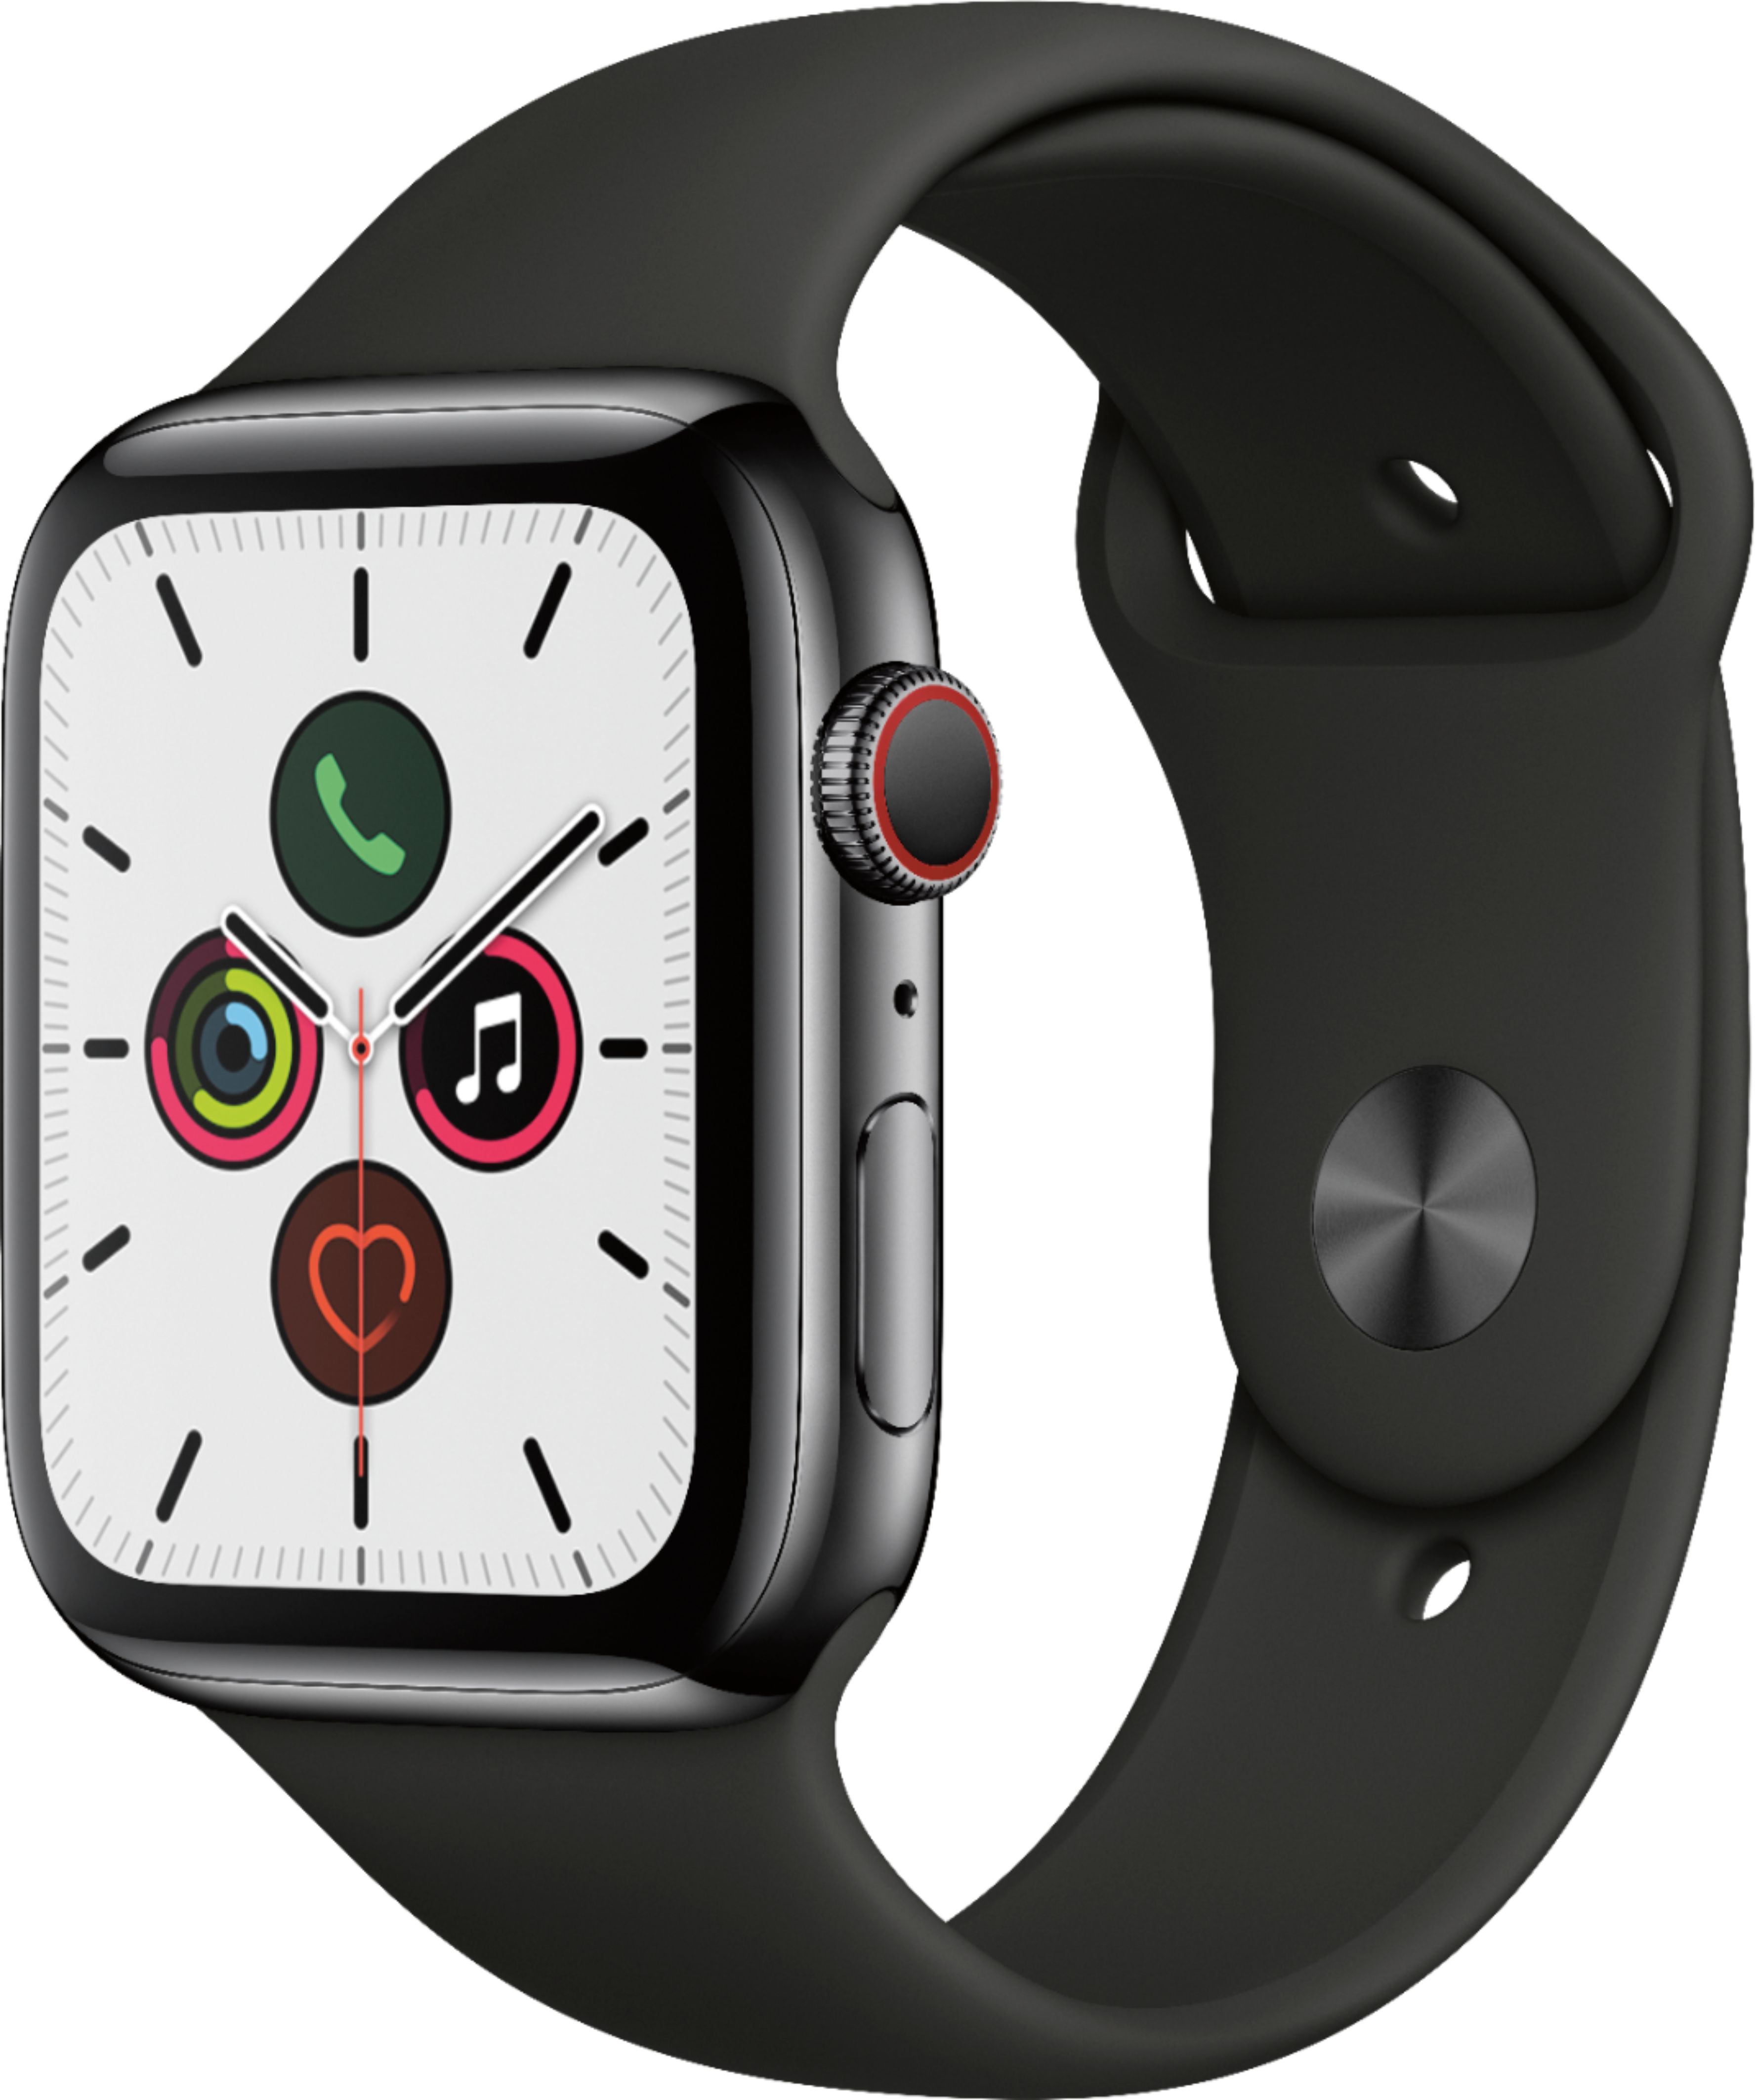 Apple Watch Series 5 Gps Cellular 44mm Space Black Stainless Steel Case With Black Sport Band Space Black Stainless Steel Verizon Mww72ll A Best Buy